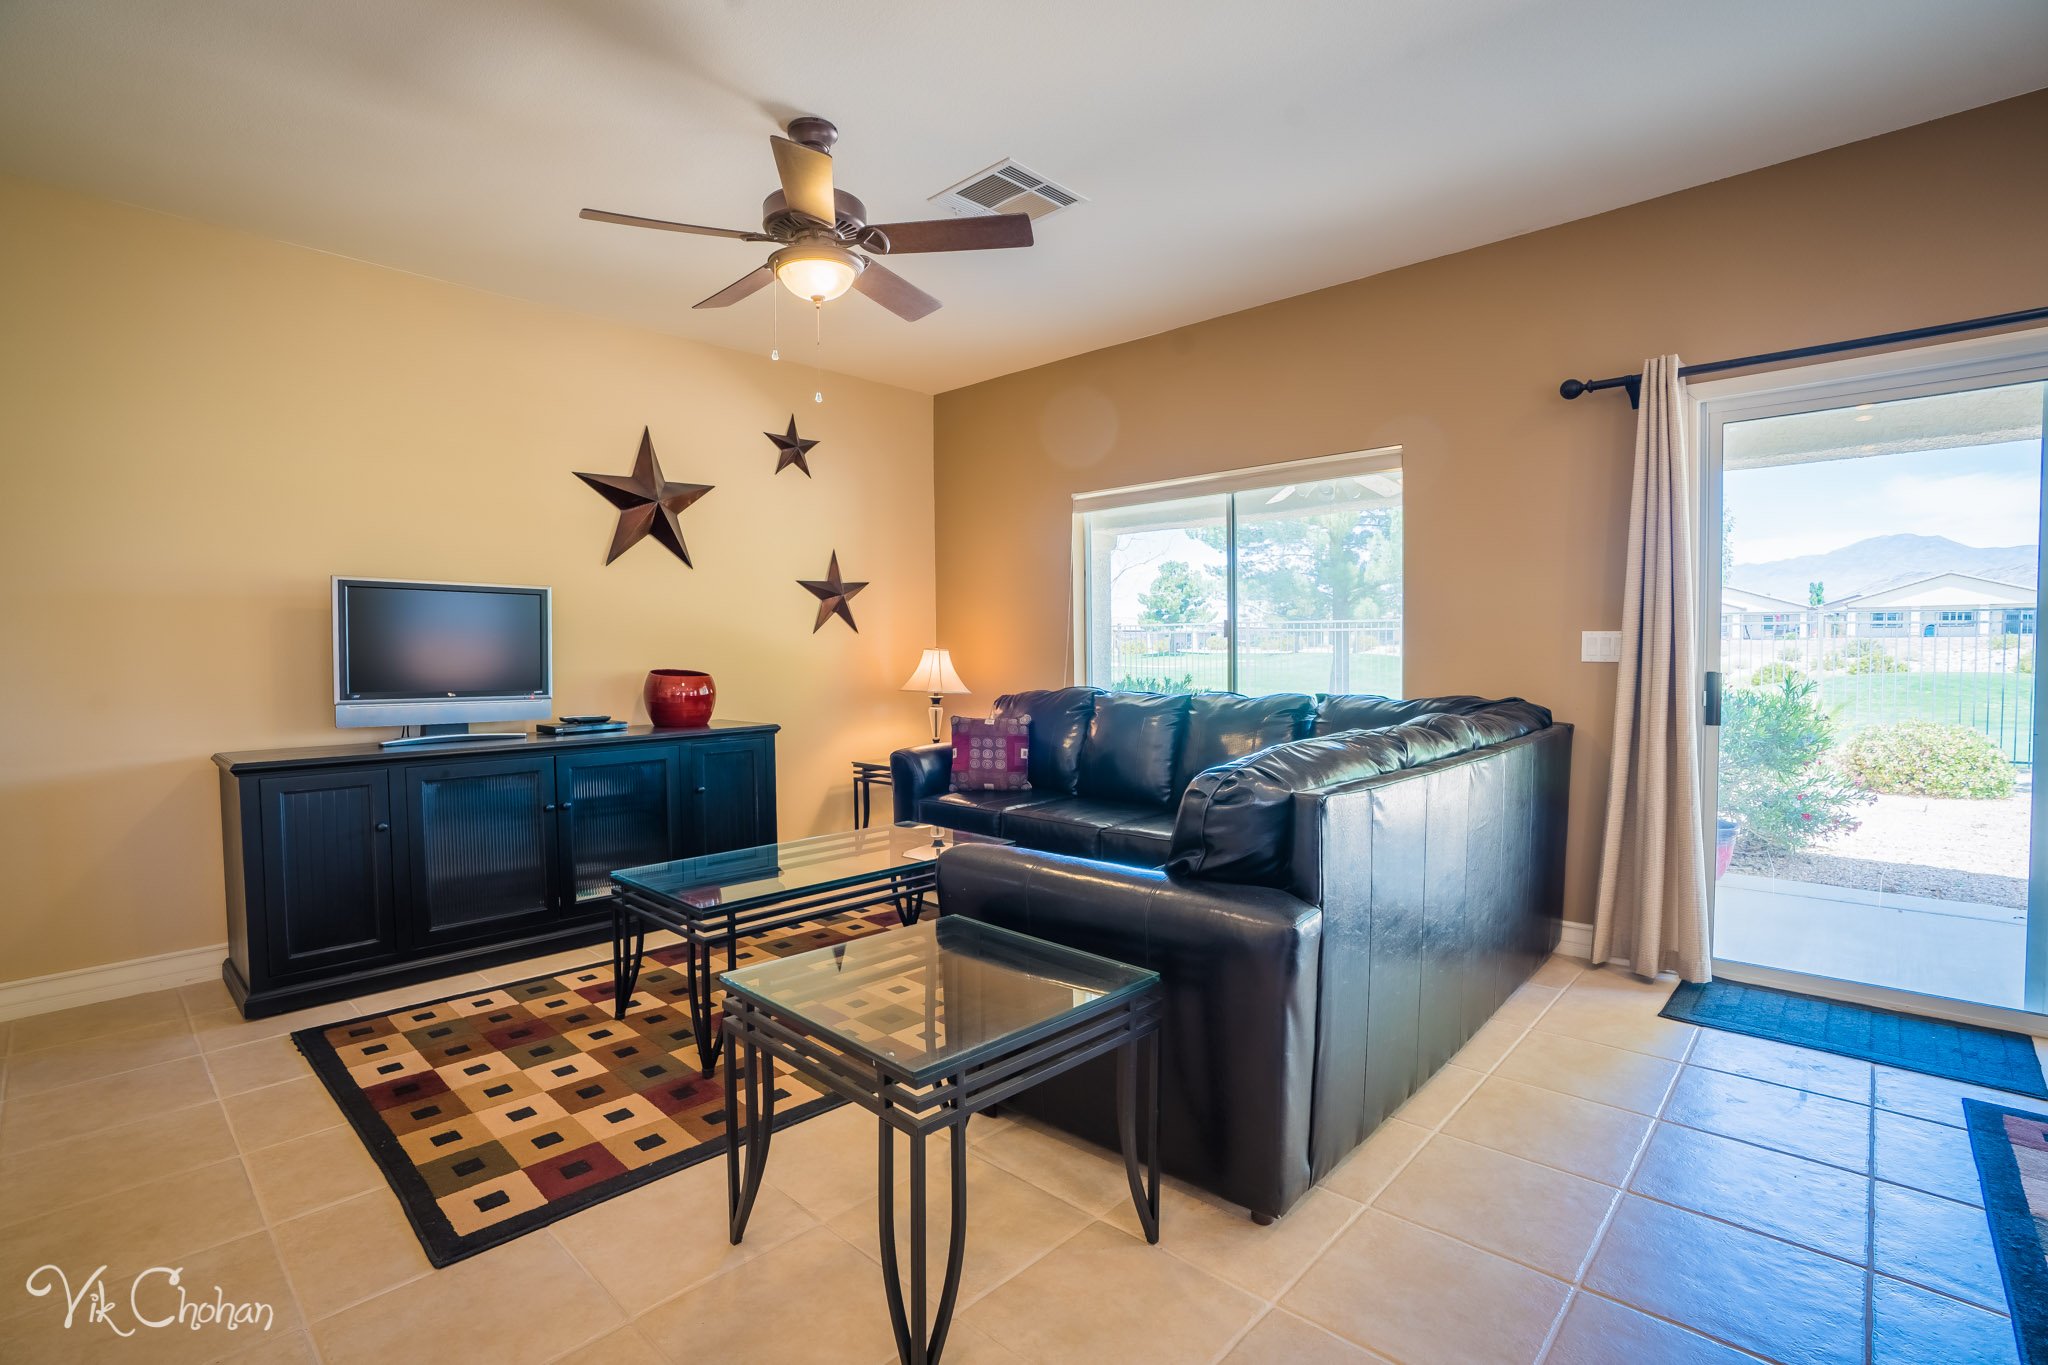 2022-05-15-5378-E-Cansano-St-Pahrump-Real-Estate-Photography-Virtual-Tour-Drone-Photography-Vik-Chohan-Photography-Photo-Booth-Social-Media-VCP-019.jpg